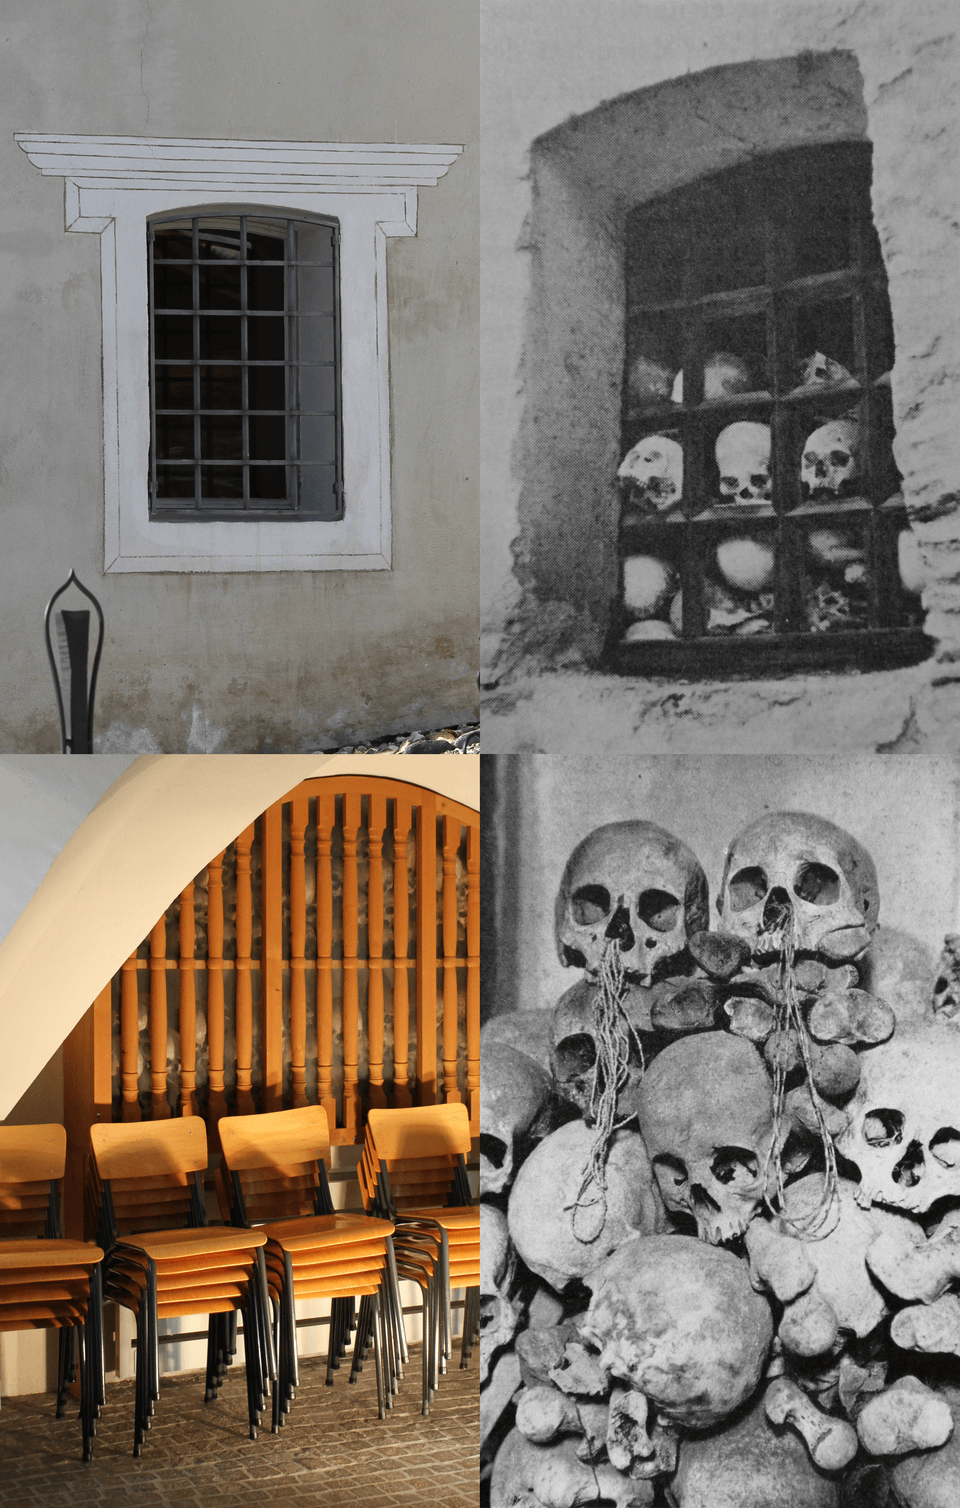 The ossuary of Lumbrein then and now